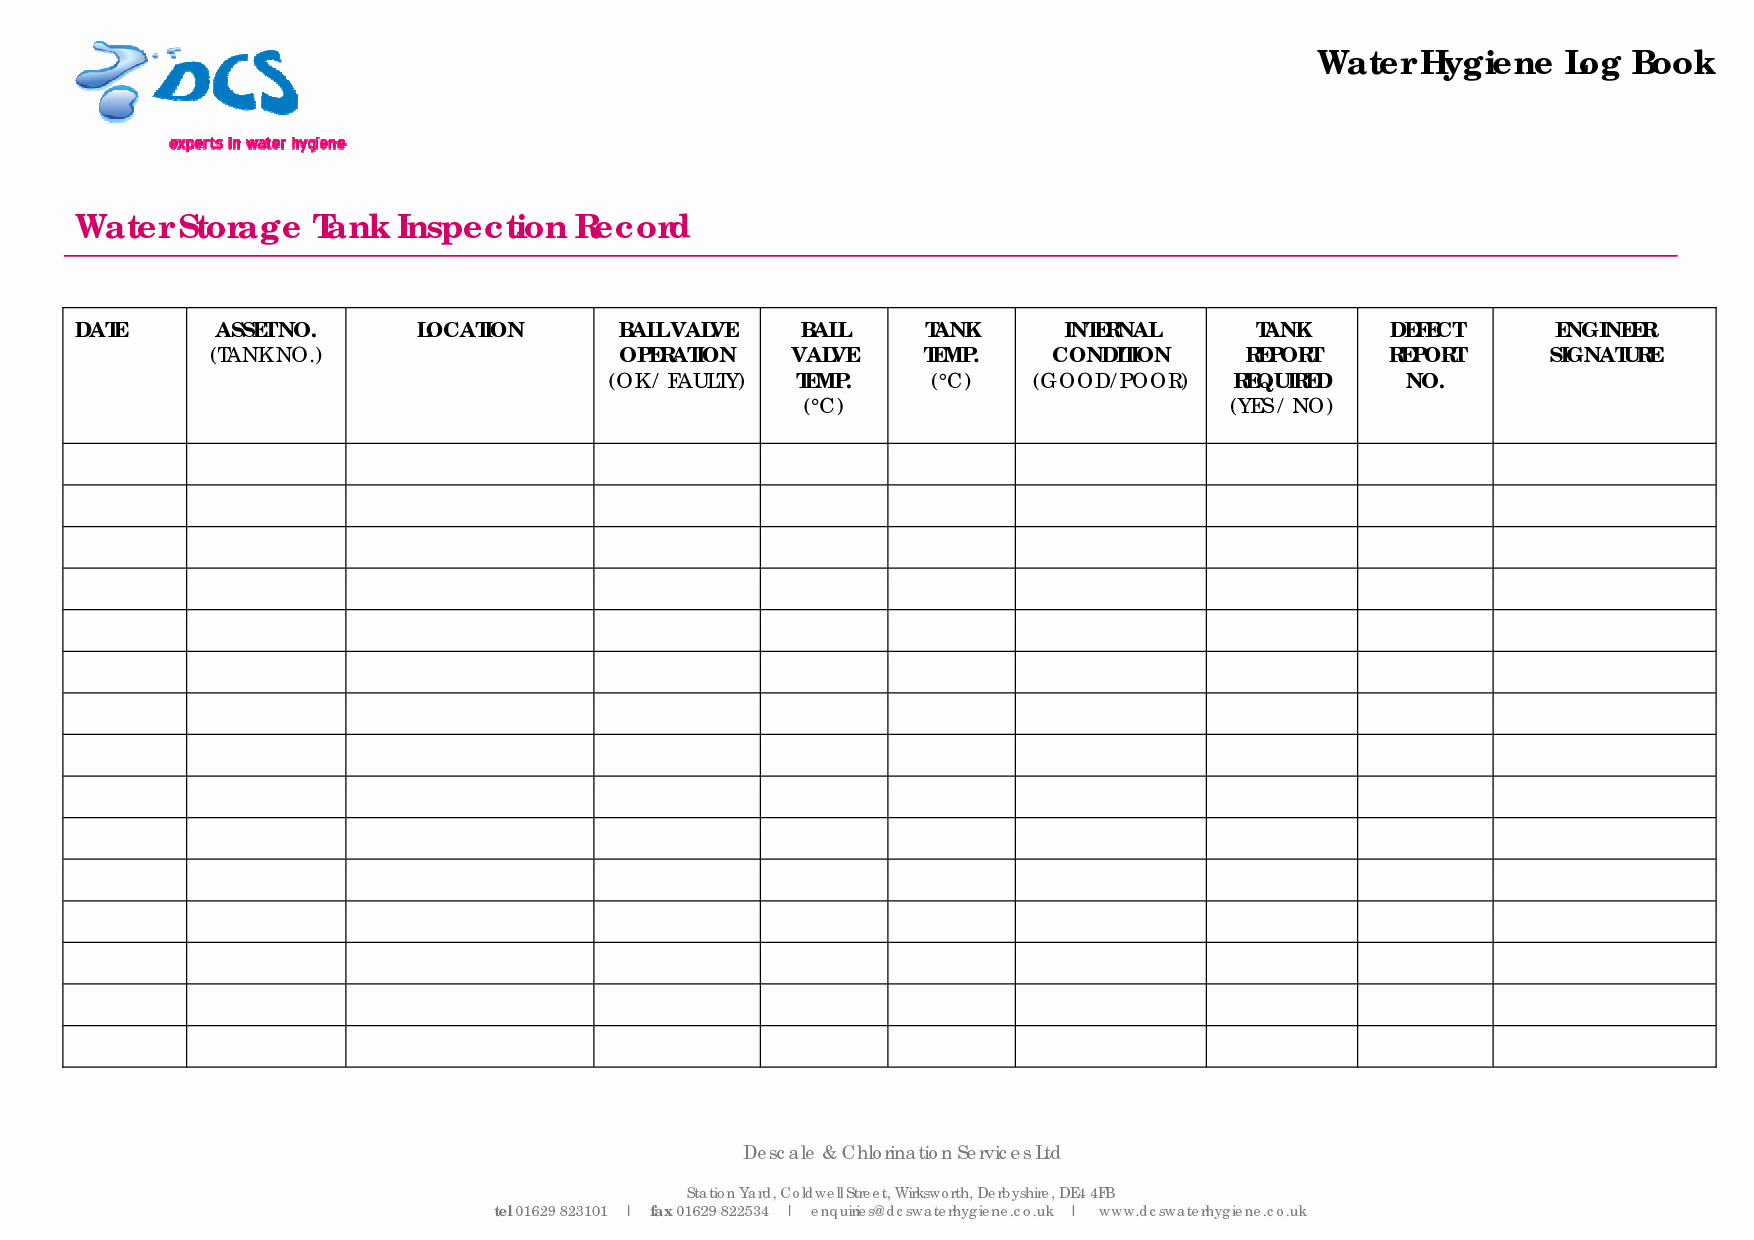 Gallery of Restaurant Manager Log Book Template.